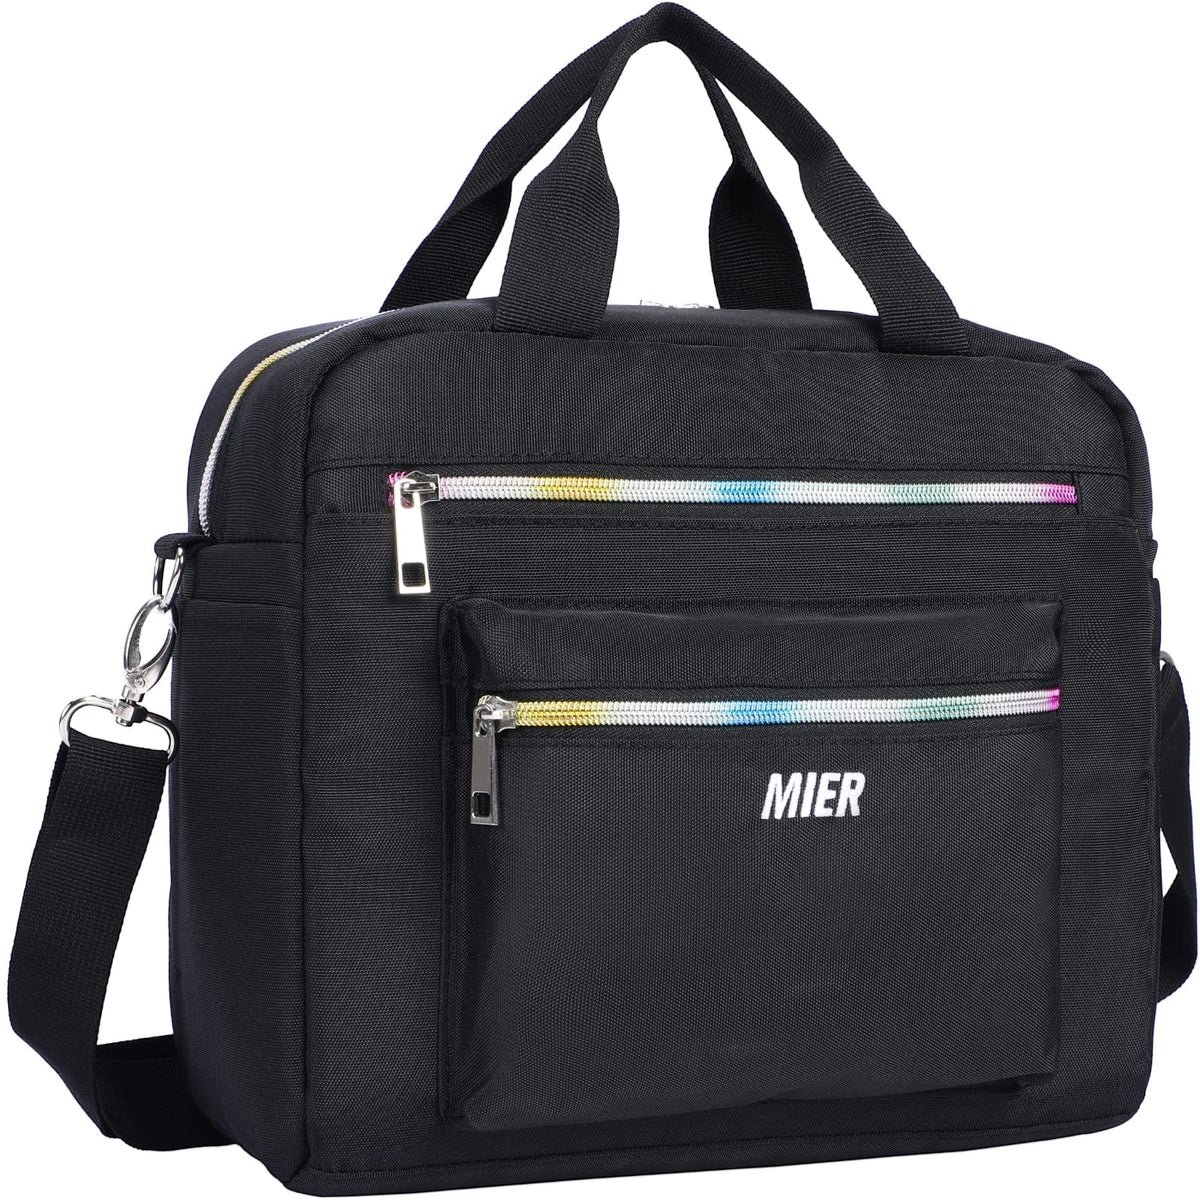 MIER Lunch Bag for Women Kids Stylish Insulated Lunch Box Fashion Adult Lunchbox Fashionable Lunch Bag Black Rainbow Zipper MIER